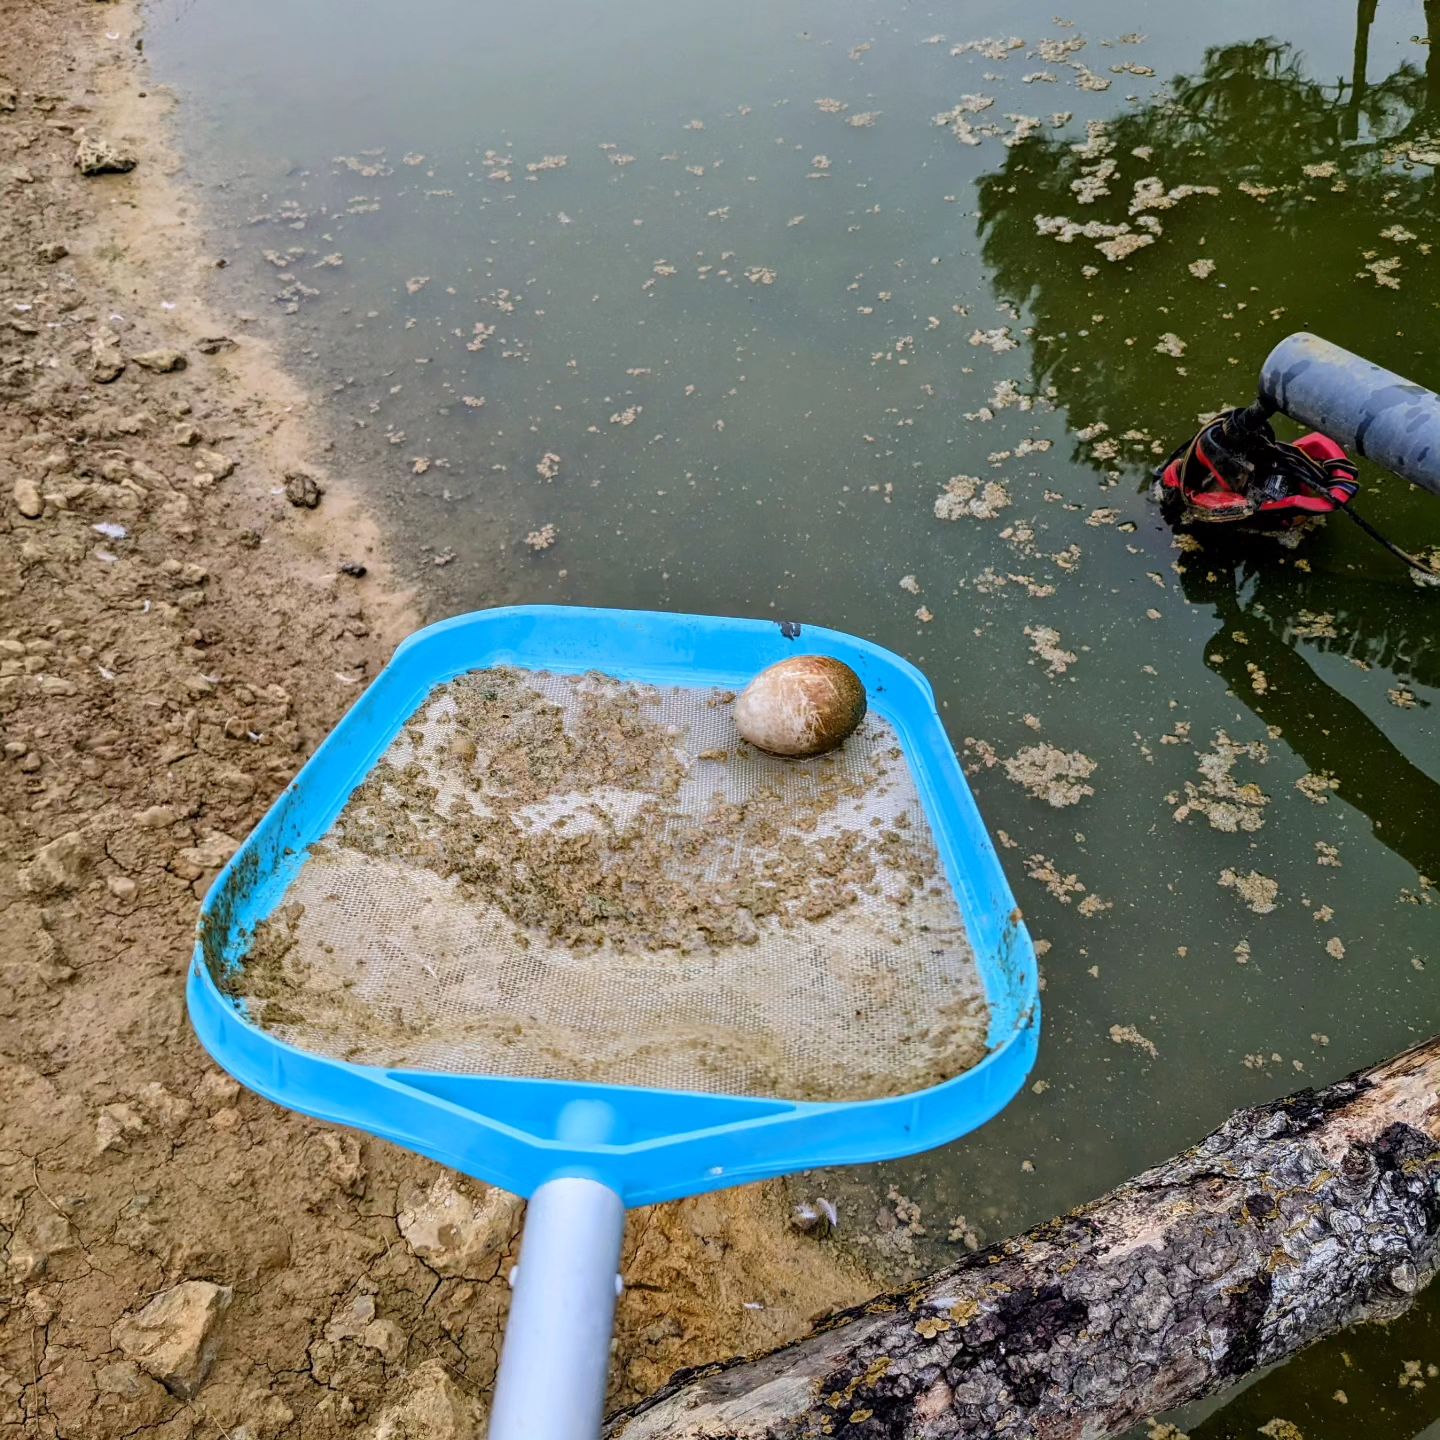 Found an egg while cleaning the pond surface 🤷